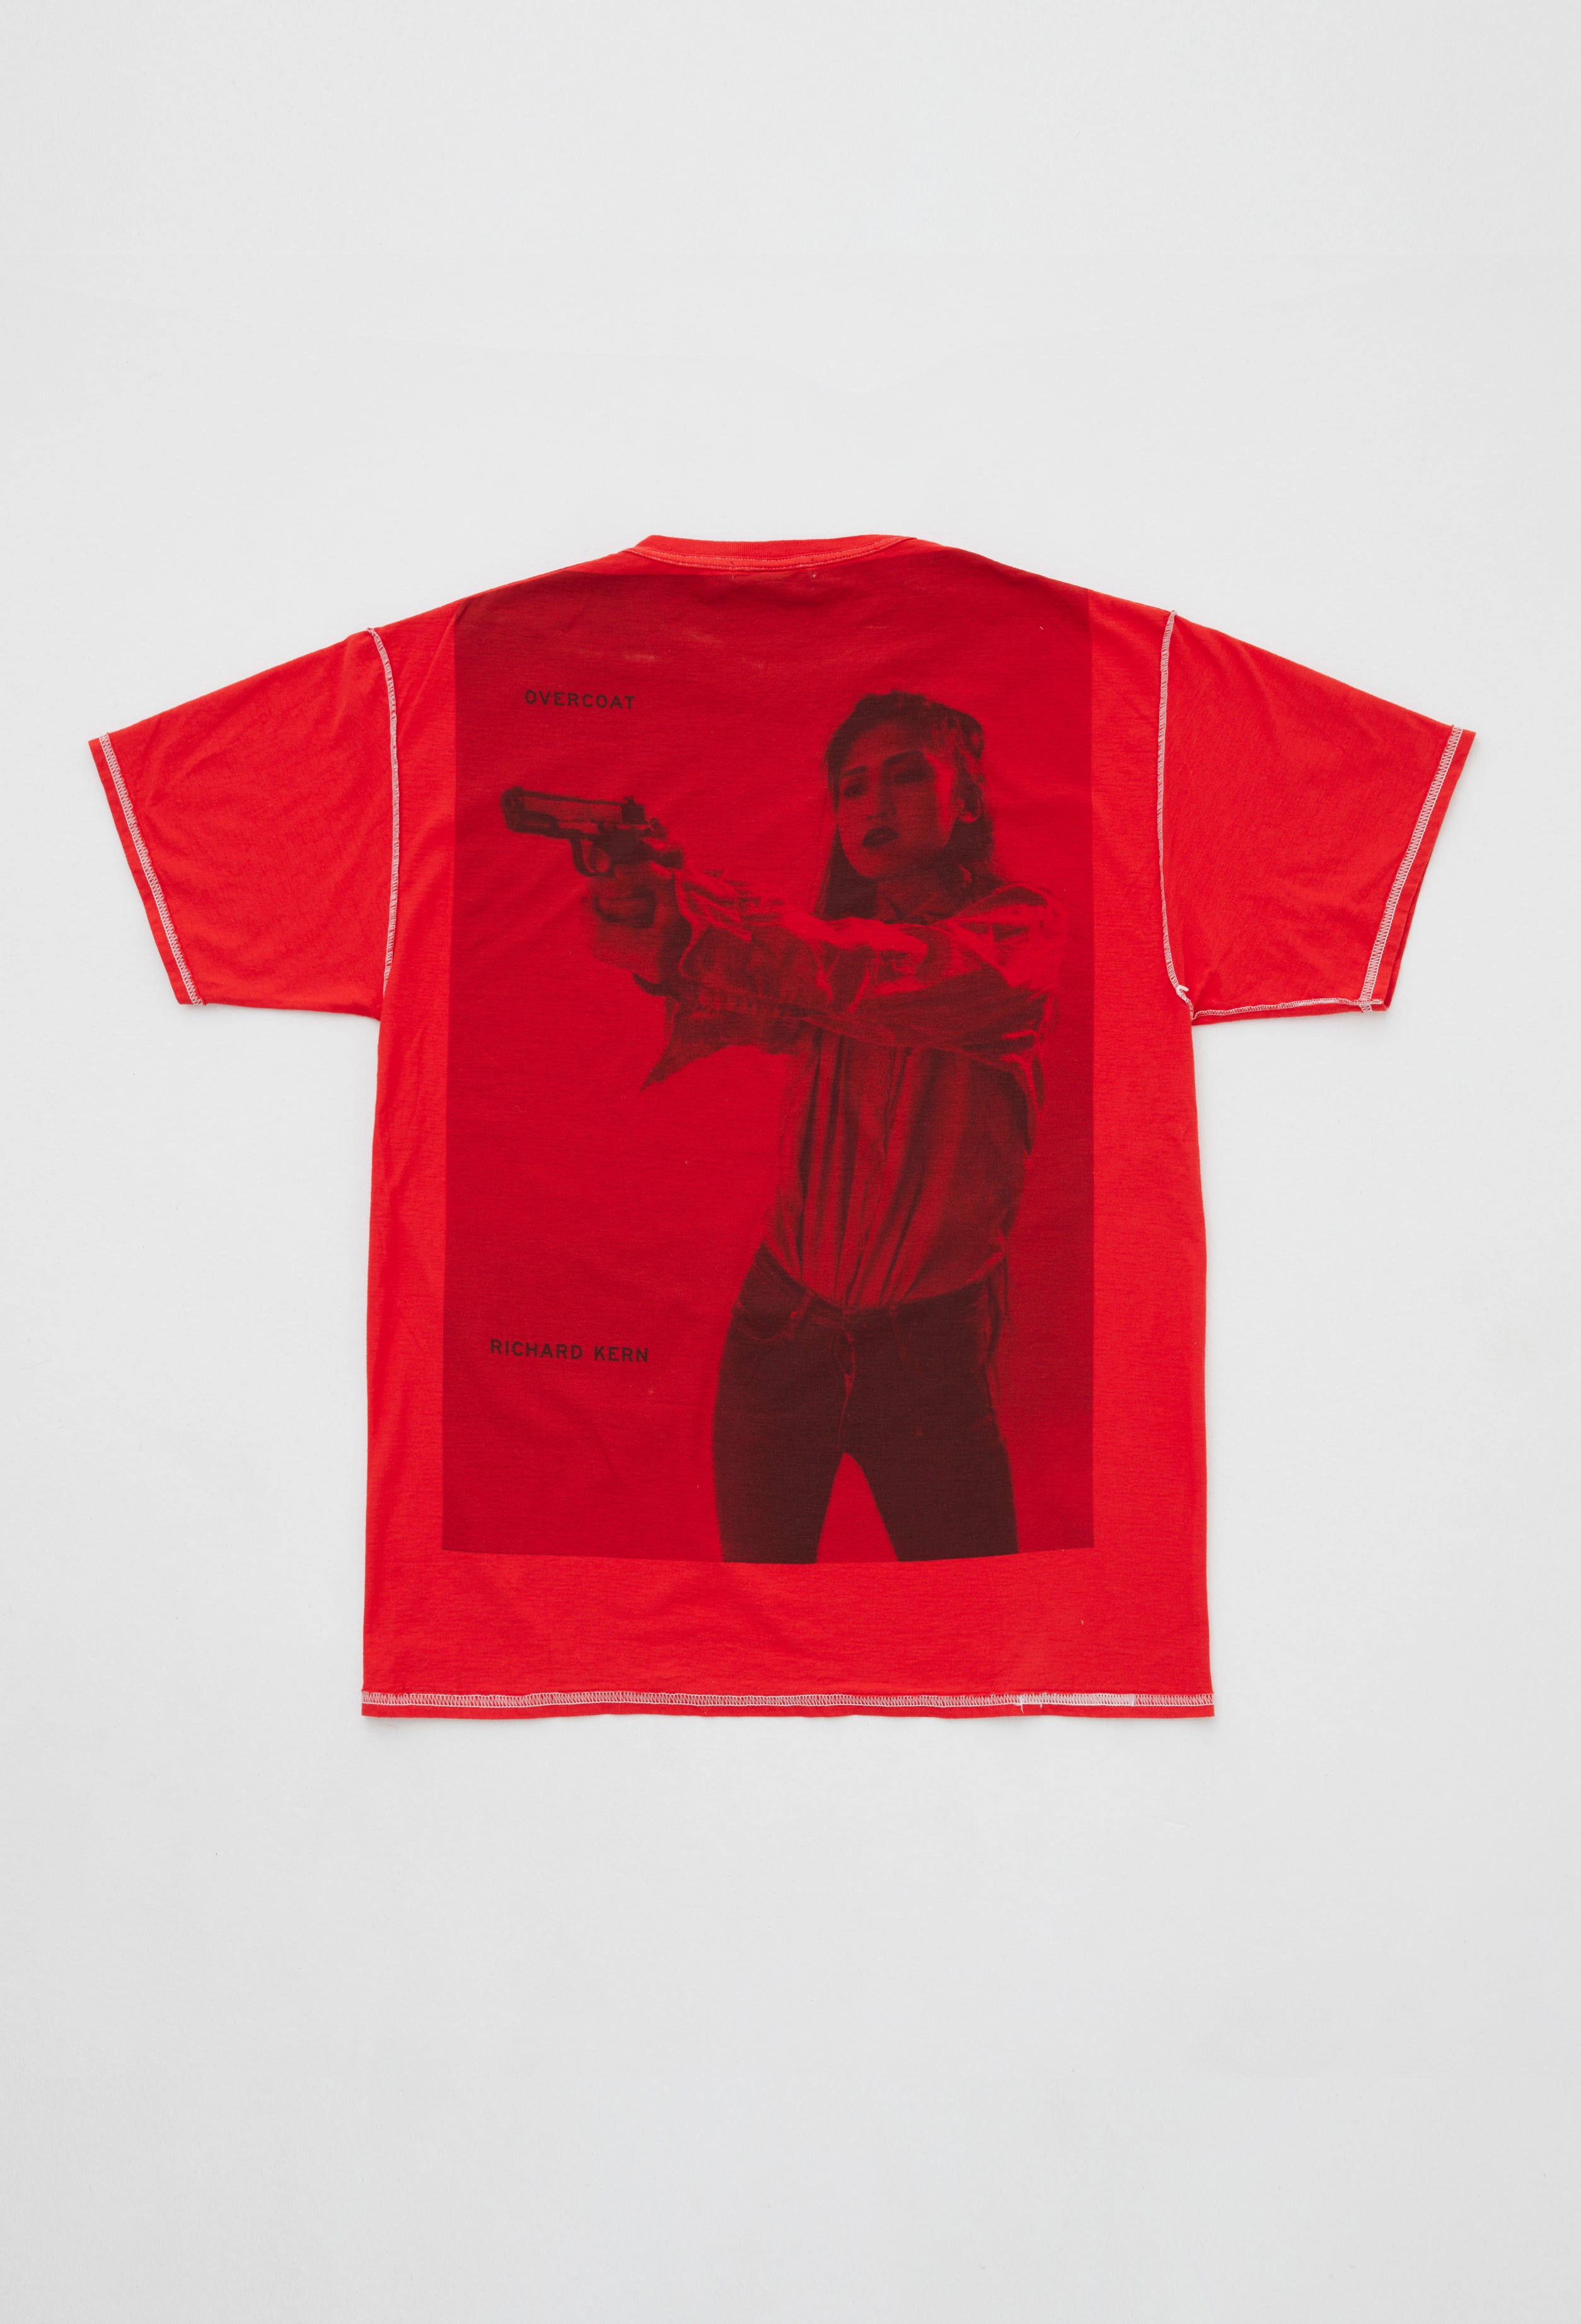 Overcoat x Richard Kern Collaboration T-shirt in Red